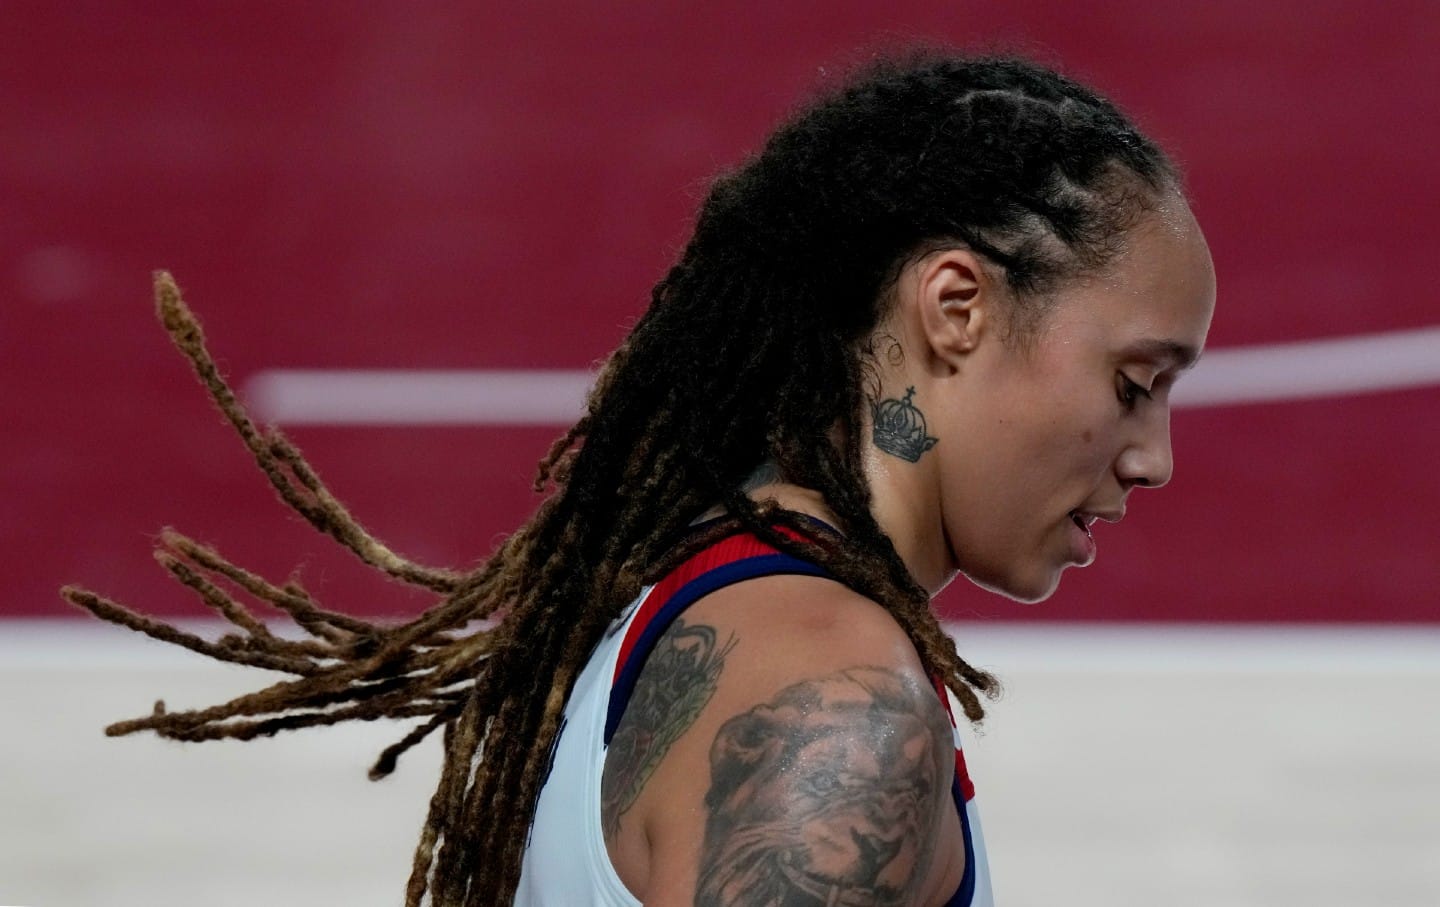 Bipartisan Group of Senators Introduces Resolution Calling for Brittney Griner’s Release